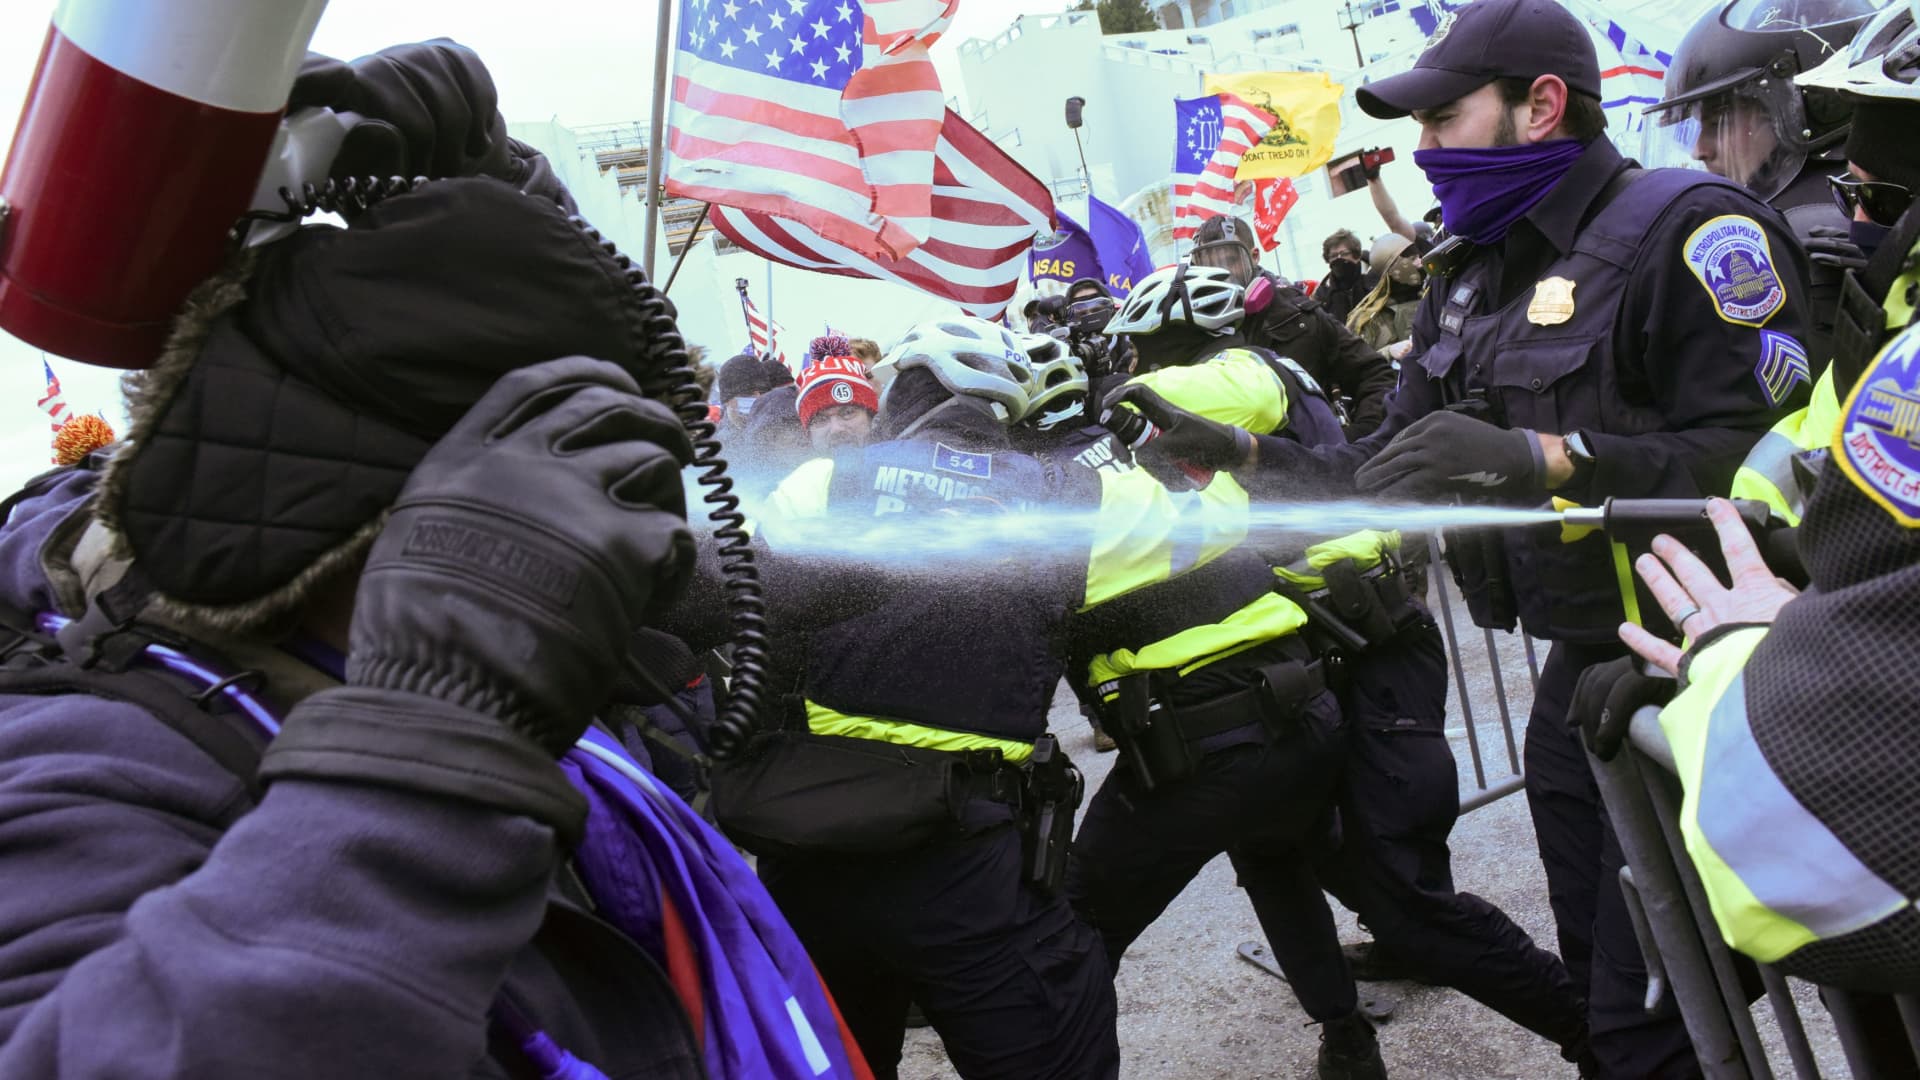 Supporters of U.S. President Donald Trump clash with police officers in front of the U.S. Capitol Building in Washington, U.S. January 6, 2021.